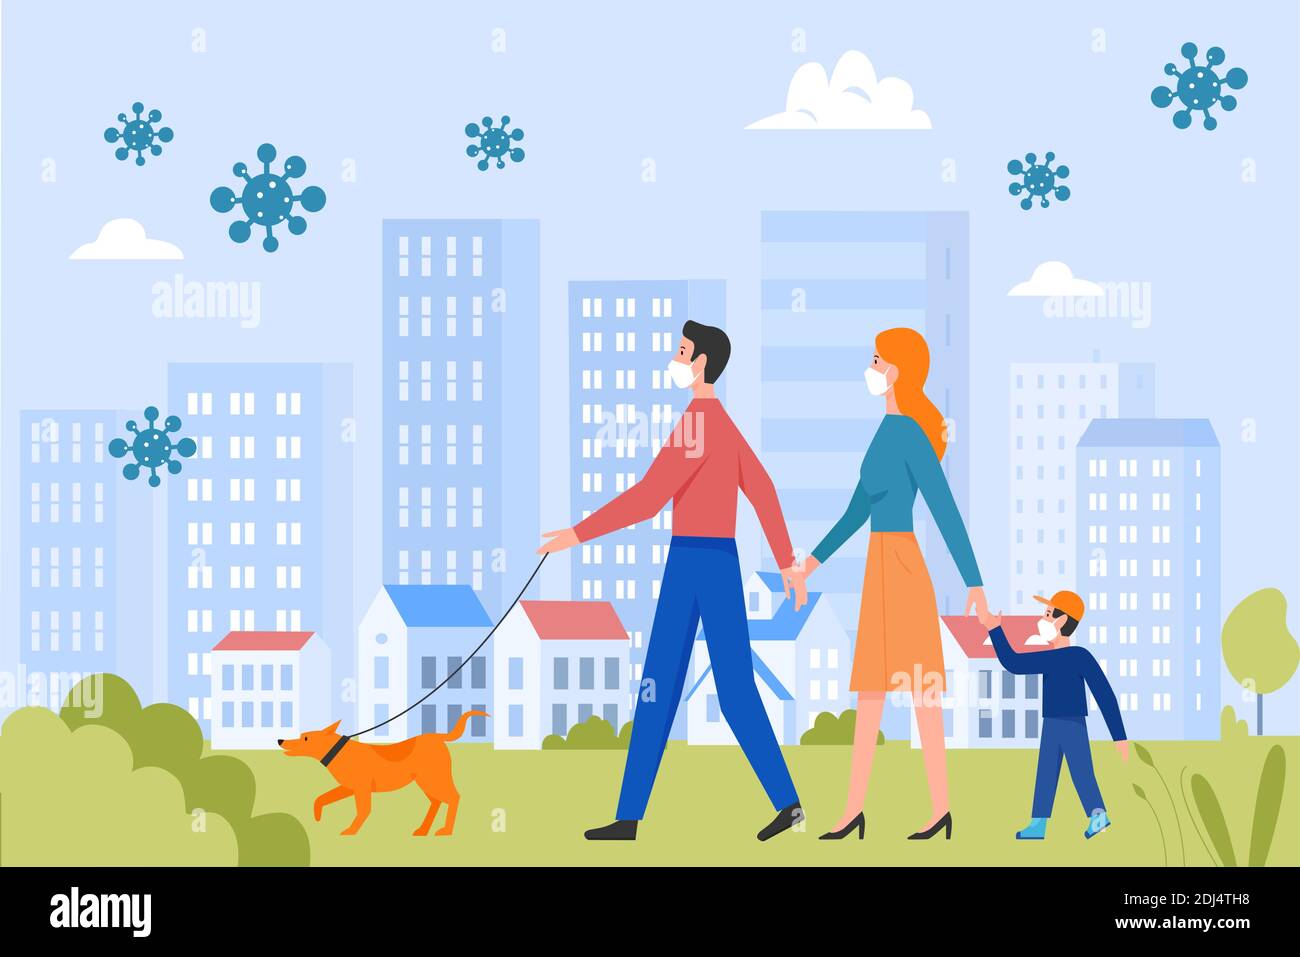 Family people with face protective masks walk in city summer park vector illustration. Cartoon mother, father and son kid characters walking with pet dog, wearing masks to protect against coronavirus Stock Vector